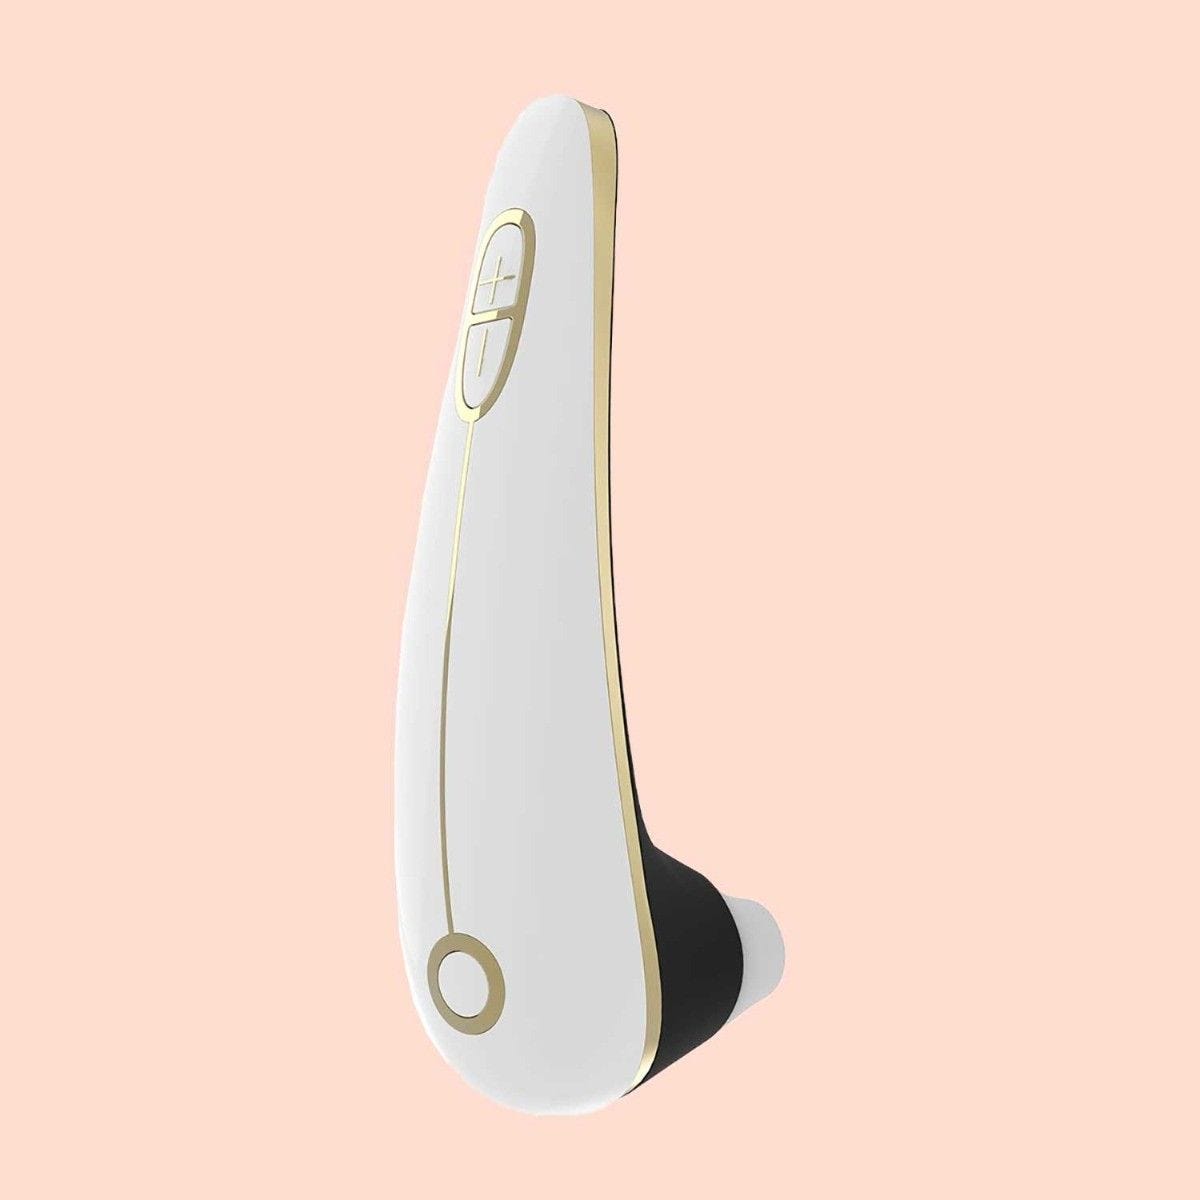 Womanizer W500 for clitoris orgasm for women image